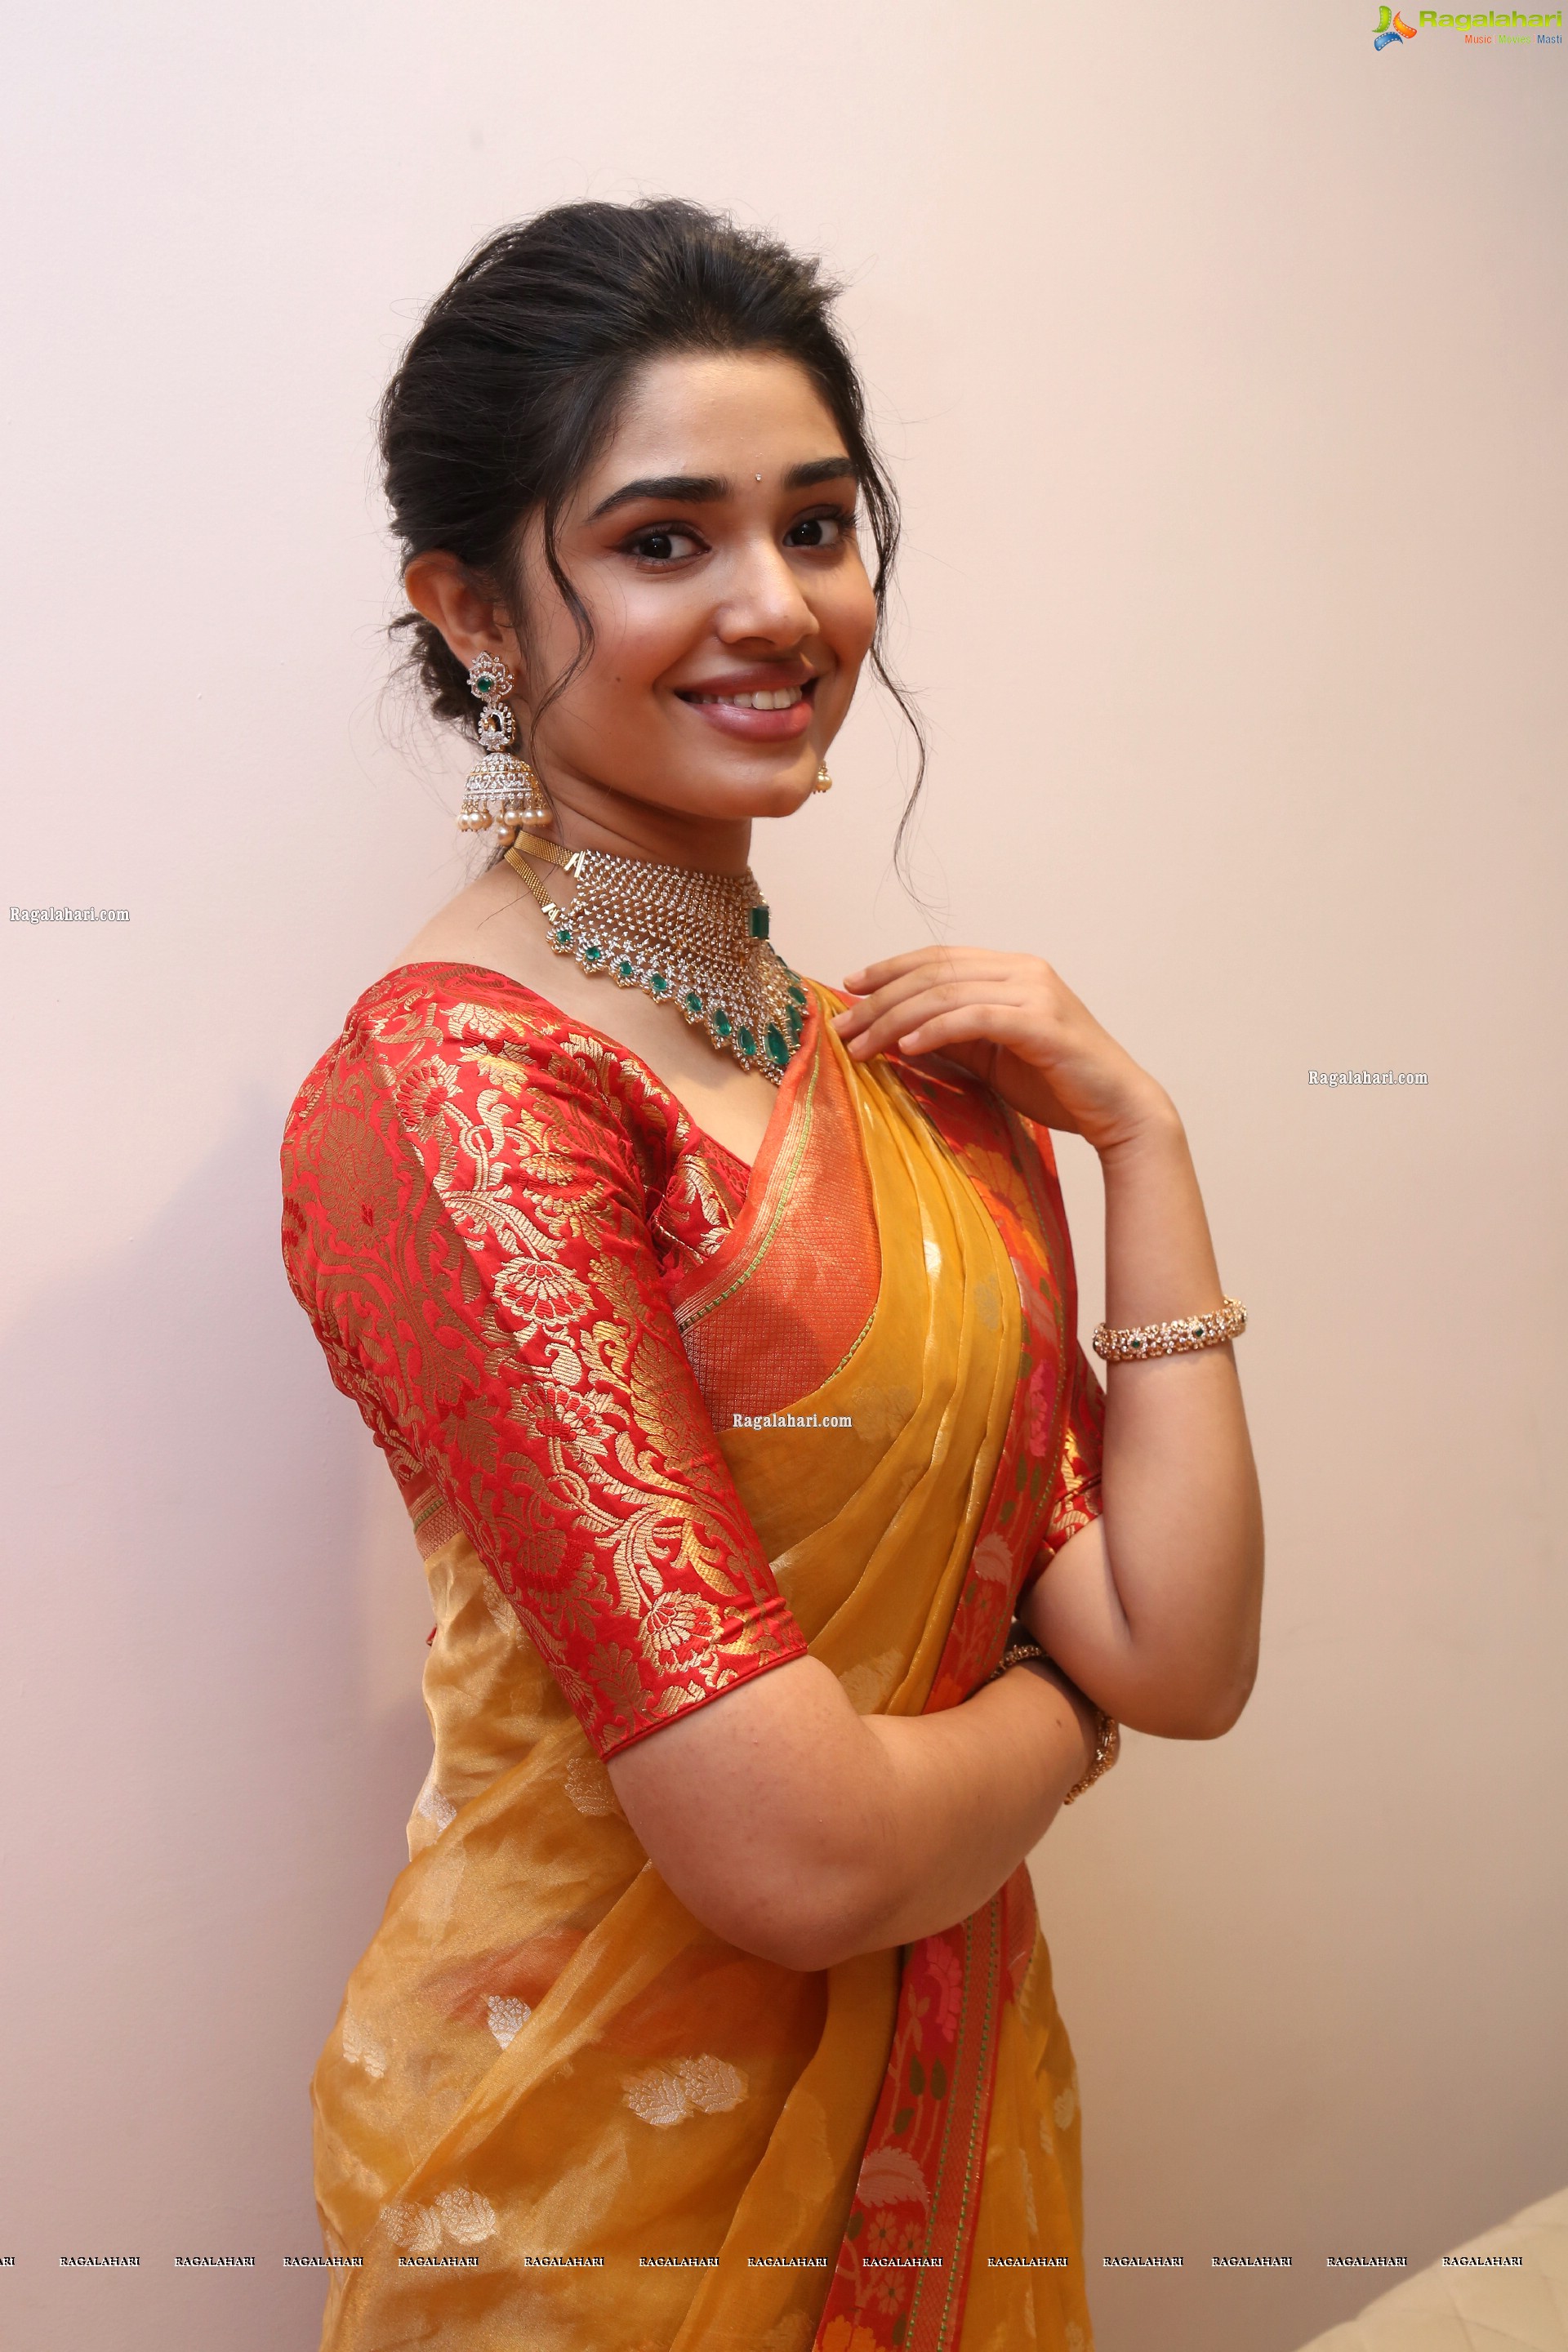 Krithi Shetty in Traditional Jewellery, HD Photo Gallery